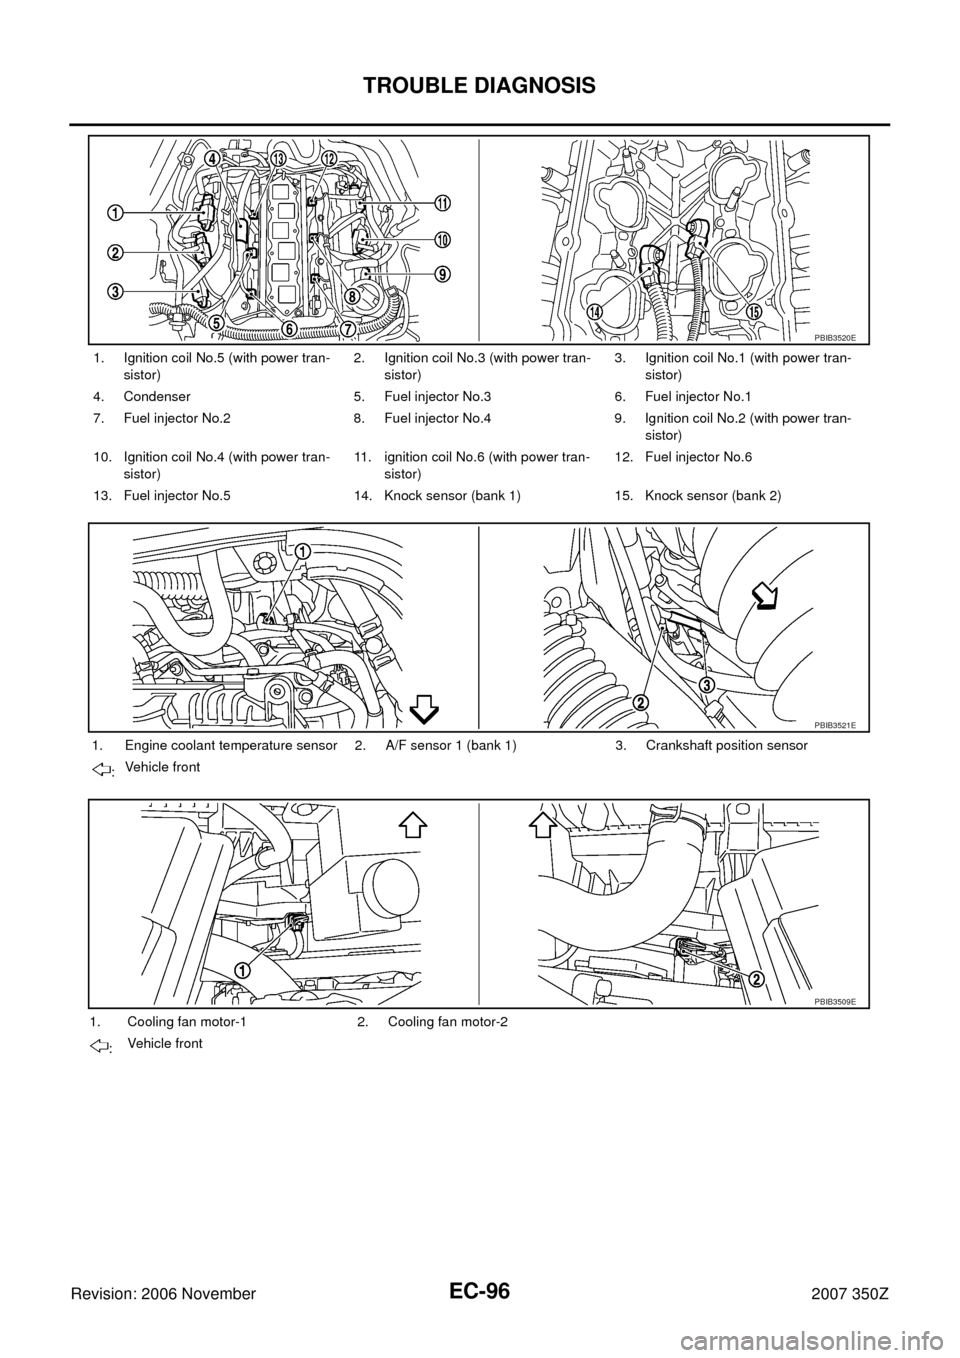 NISSAN 350Z 2007 Z33 Engine Control Workshop Manual EC-96
TROUBLE DIAGNOSIS
Revision: 2006 November2007 350Z
1. Ignition coil No.5 (with power tran-
sistor)2. Ignition coil No.3 (with power tran-
sistor)3. Ignition coil No.1 (with power tran-
sistor)
4